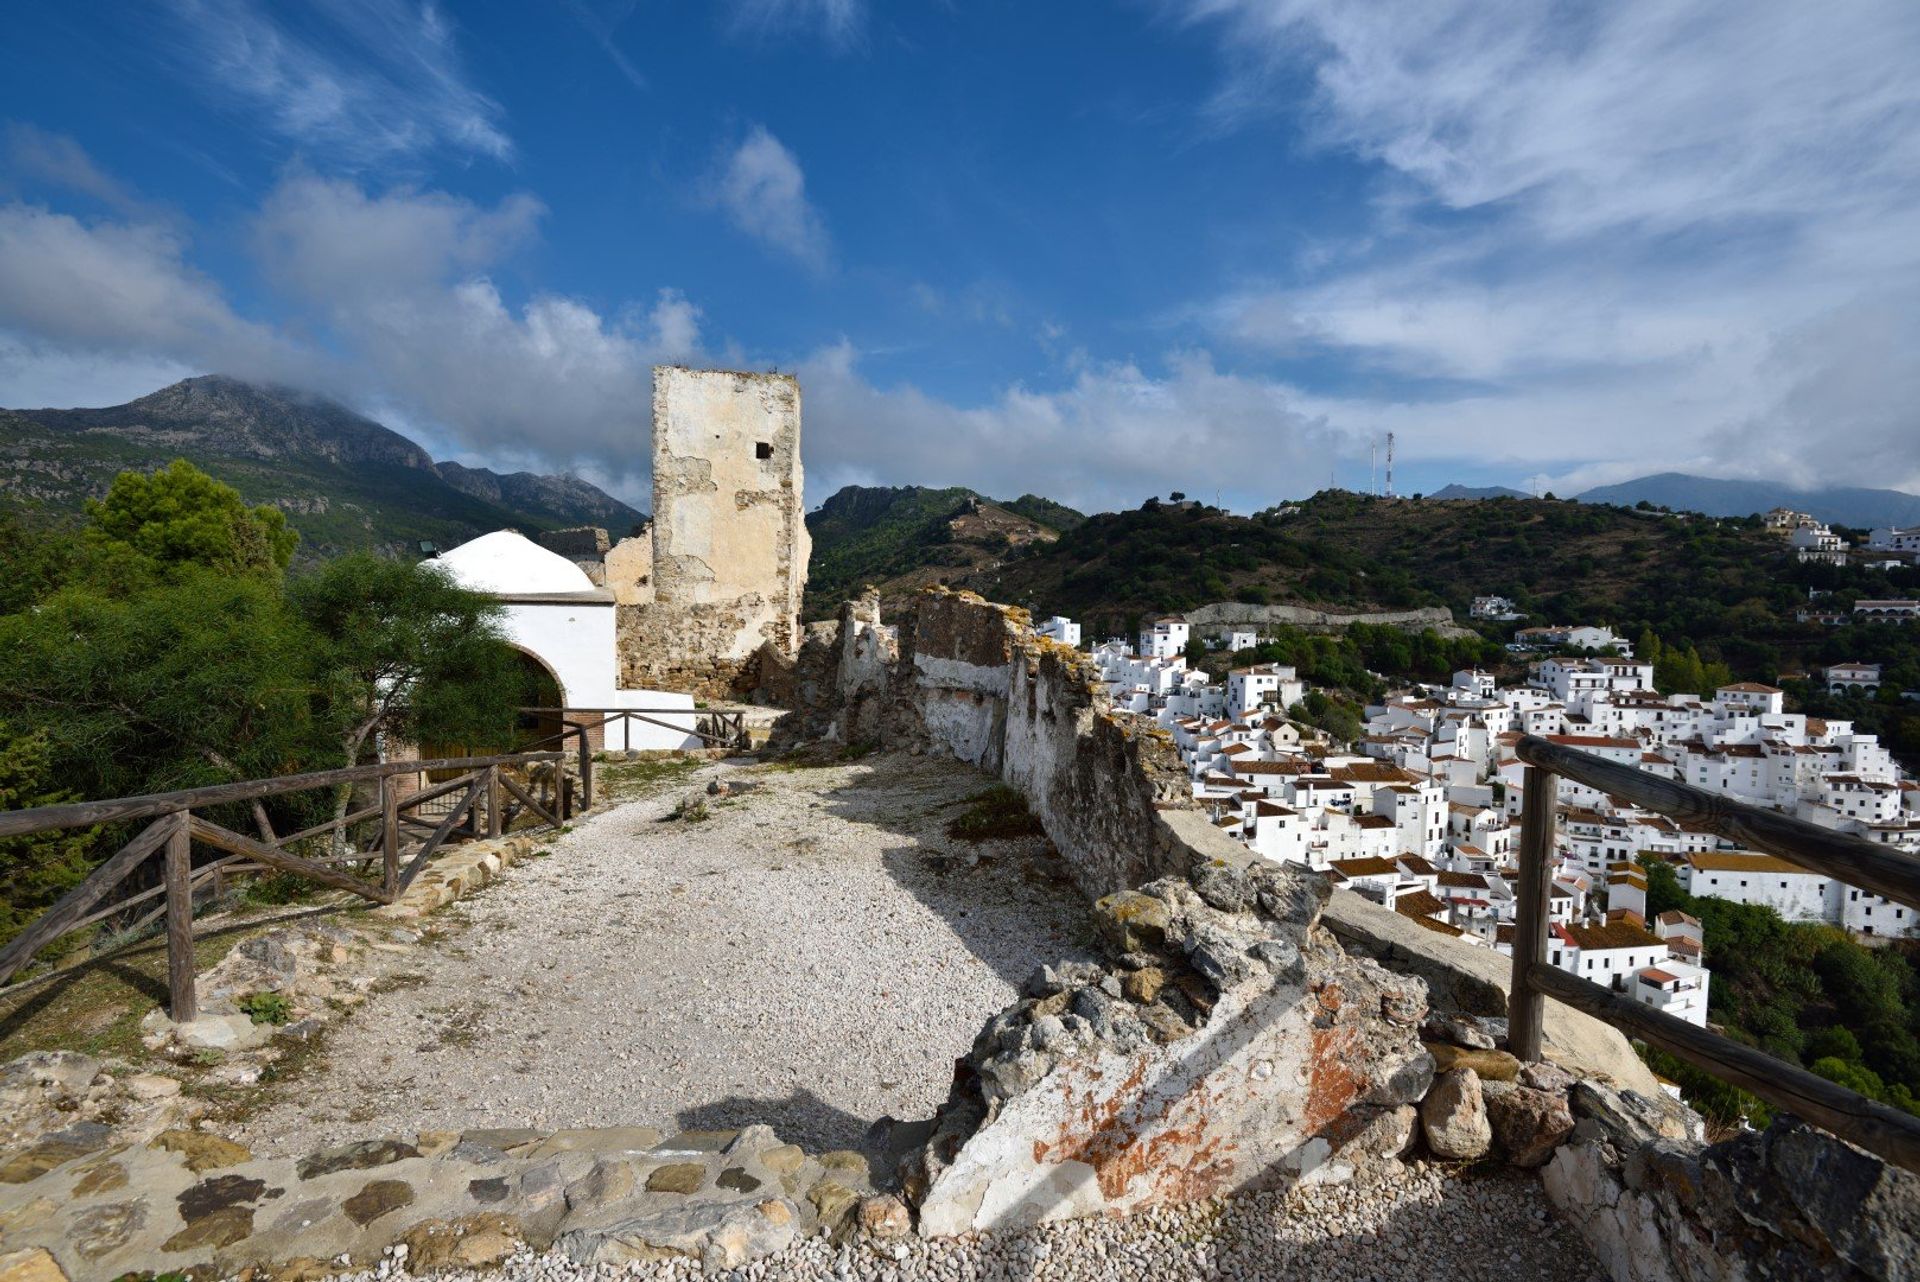 Take a visit to the Arab Fortress of Cesares at the top and discover the rich past of this charming little village